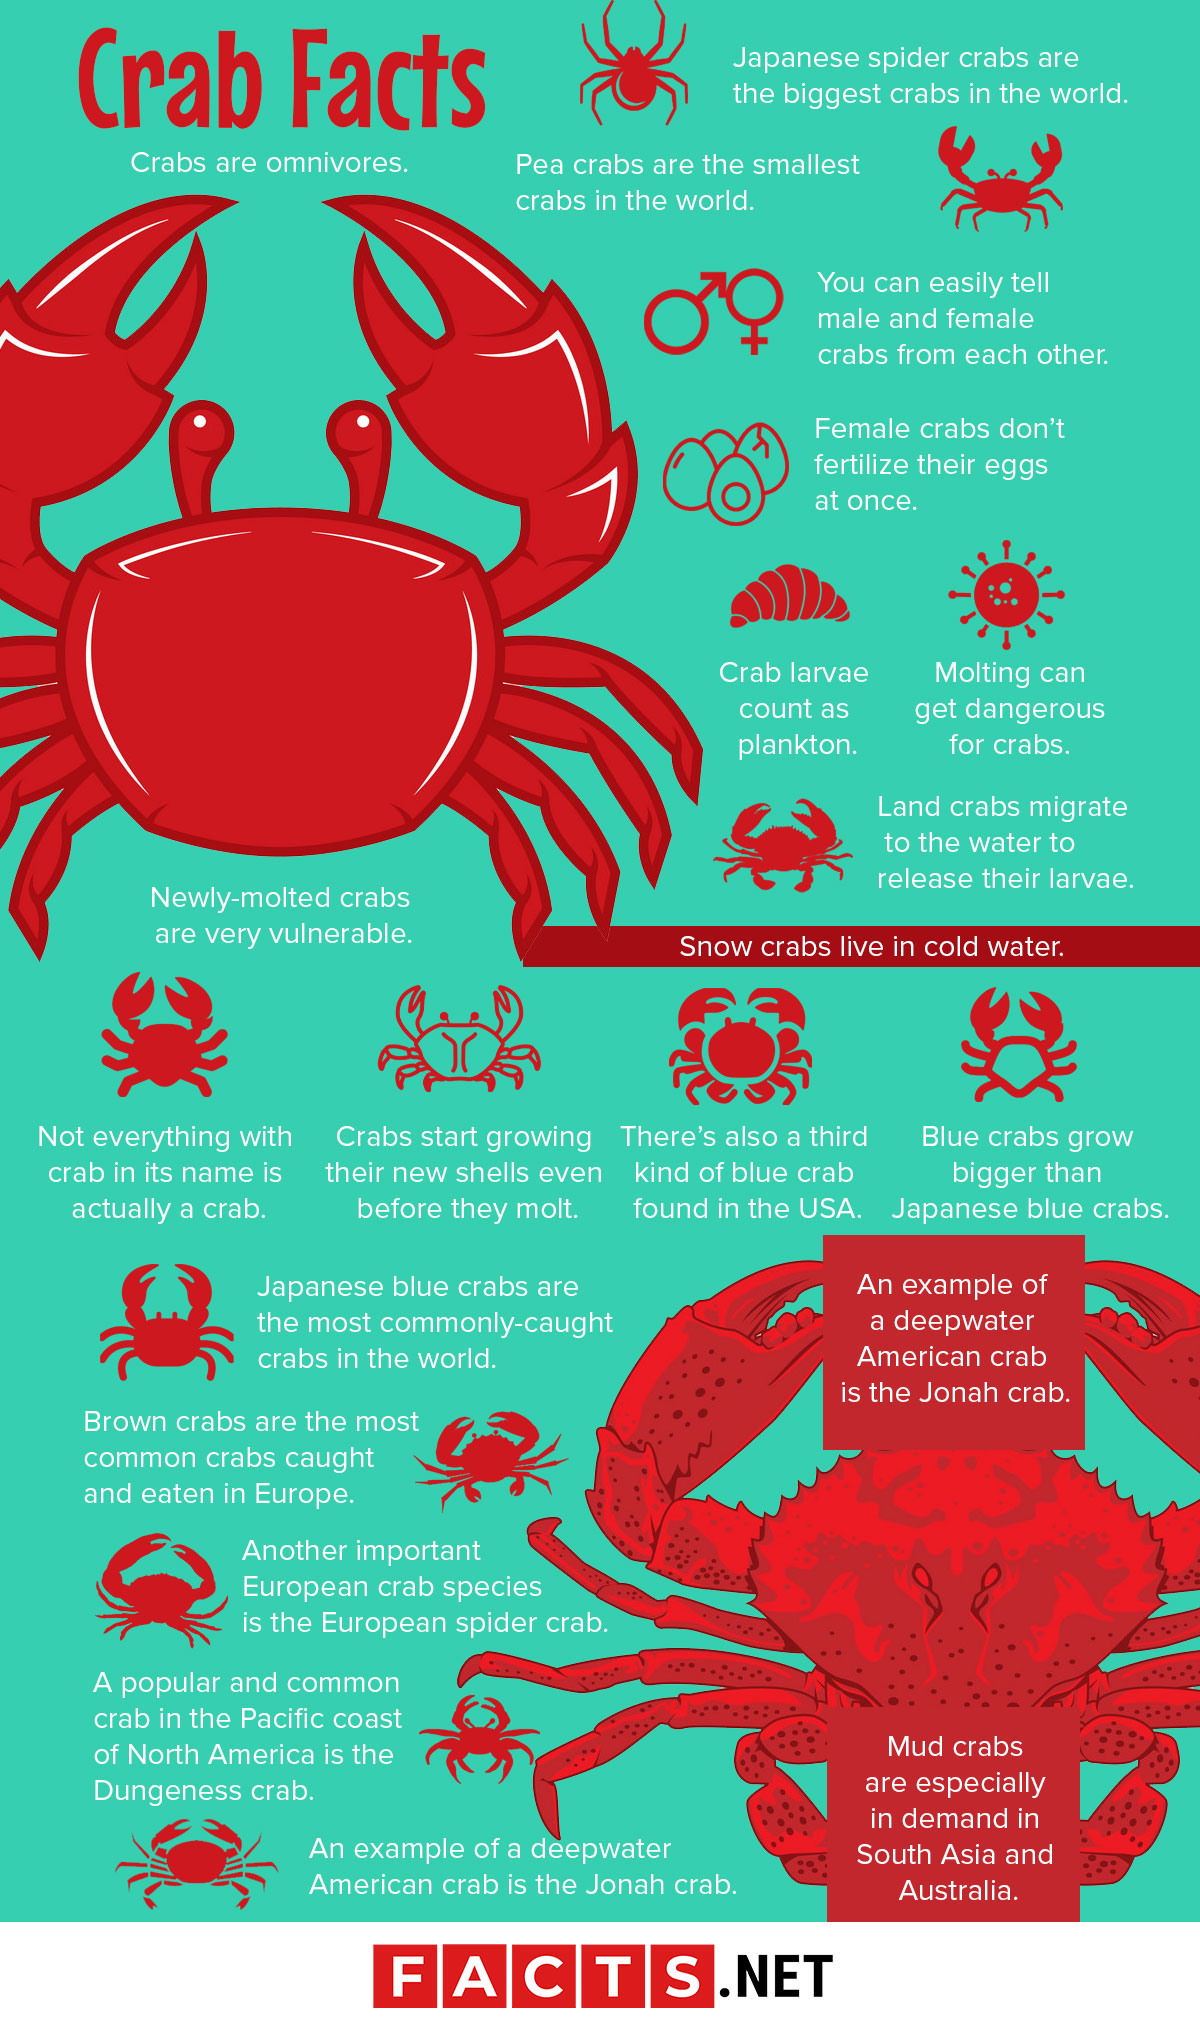 What are some fun facts about crabs?